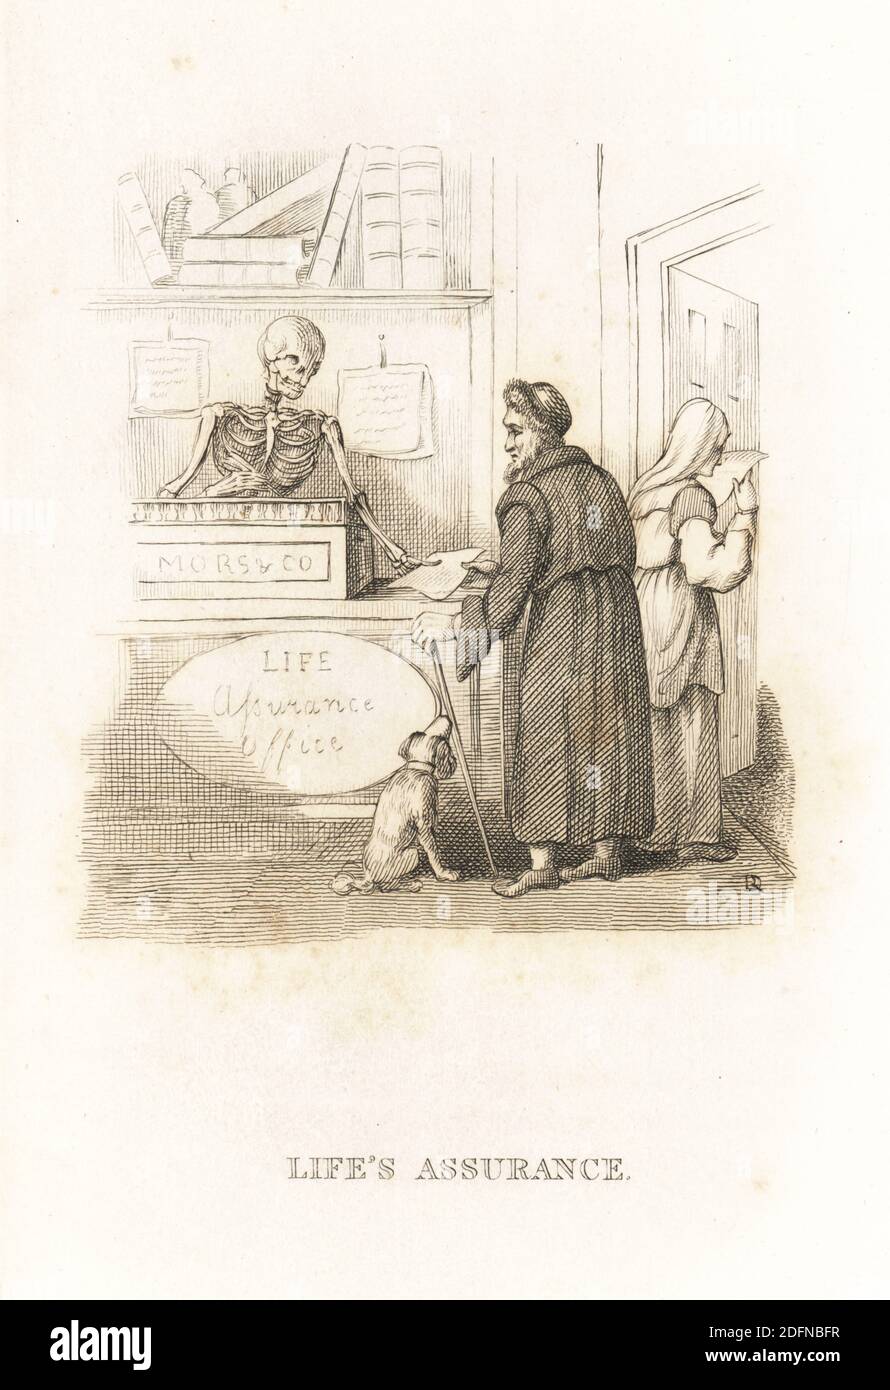 The skeleton of Death at the insurance office. Death behind the counter with a quill pen gives out Life Assurance contracts to an old man and woman in an office. Illustration drawn and engraved on steel by Richard Dagley from his own Death’s Doings, Consisting of Numerous Original Compositions in Verse and Prose, J. Andrews, London, 1827. Dagley (1761-1841) was an English painter, illustrator and engraver. Stock Photo